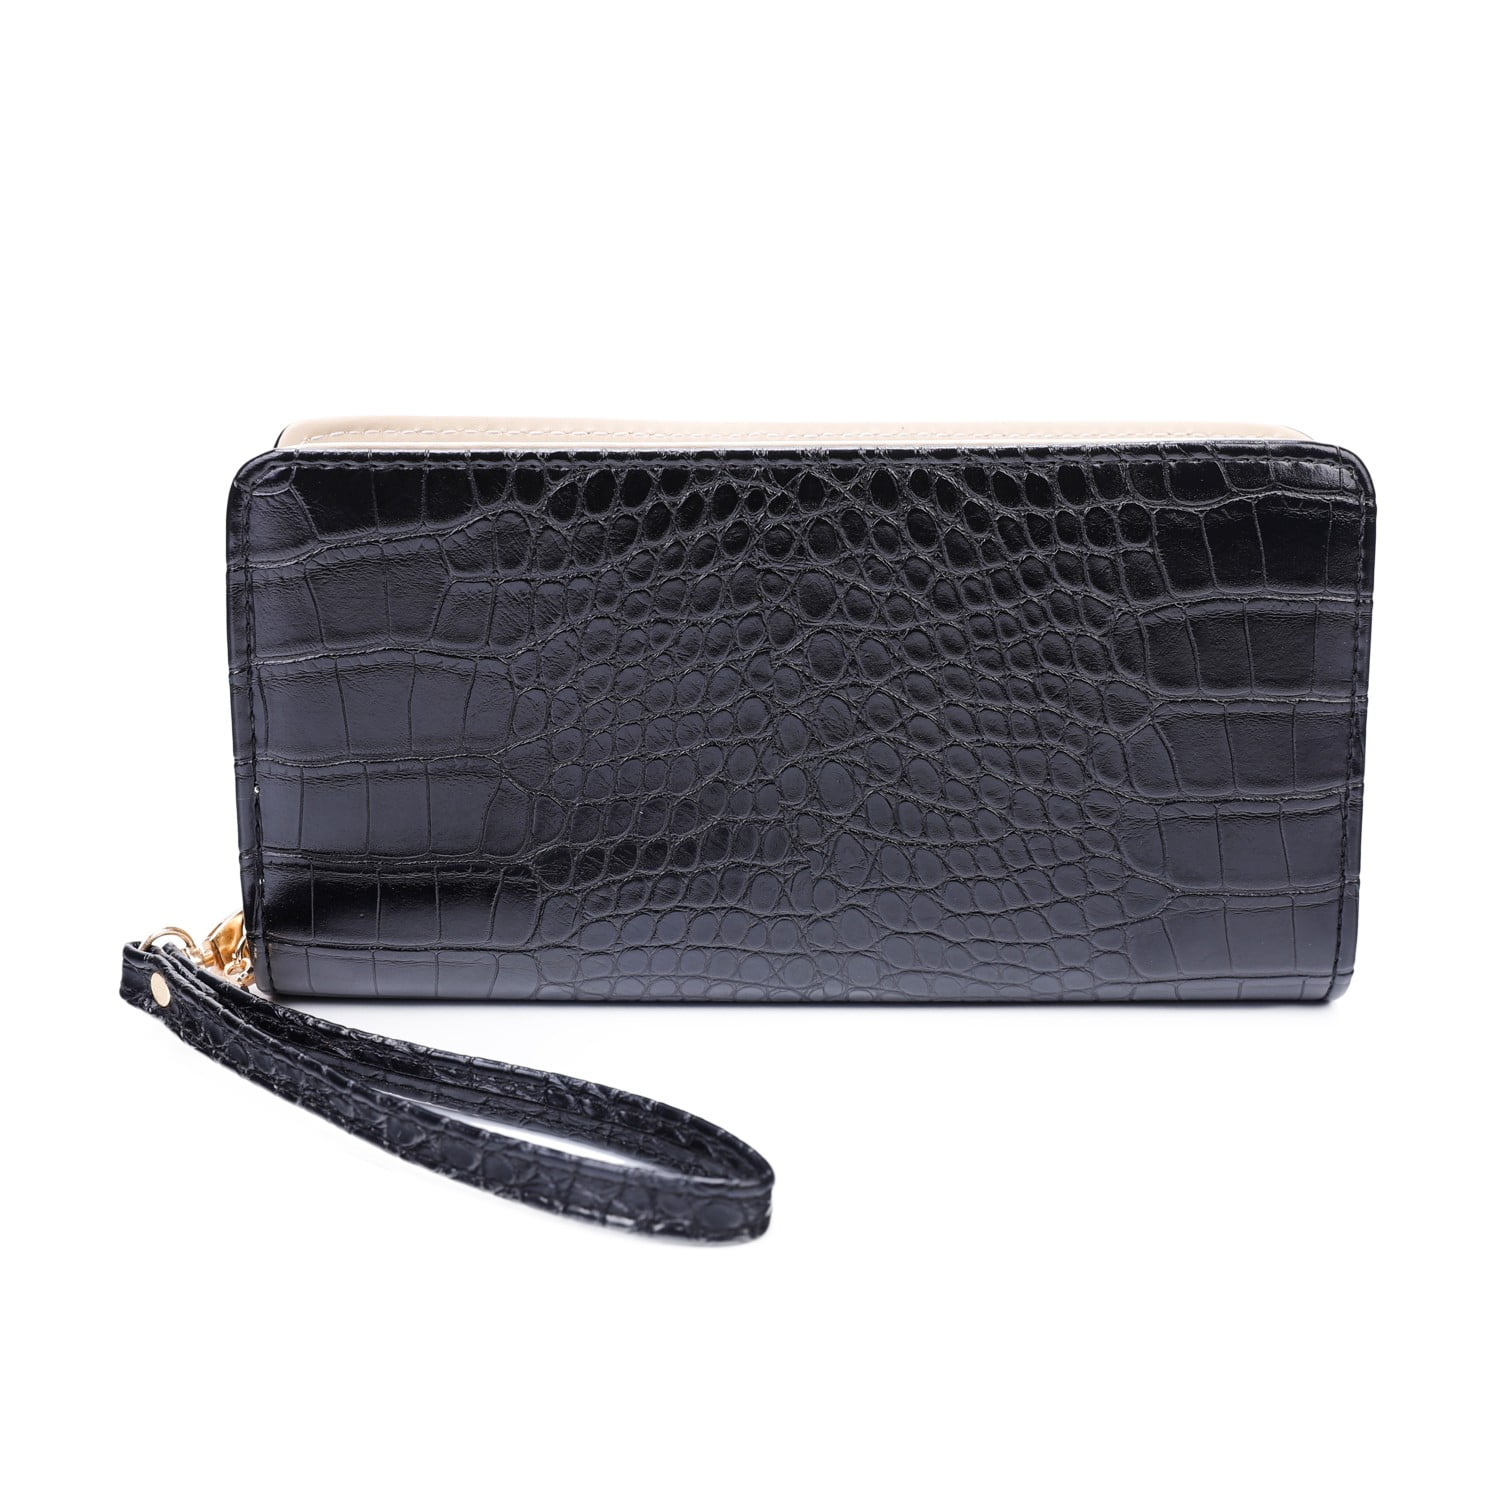 Designer Croco Textured Double Side Long Wallet With Hand Strap, Black ...